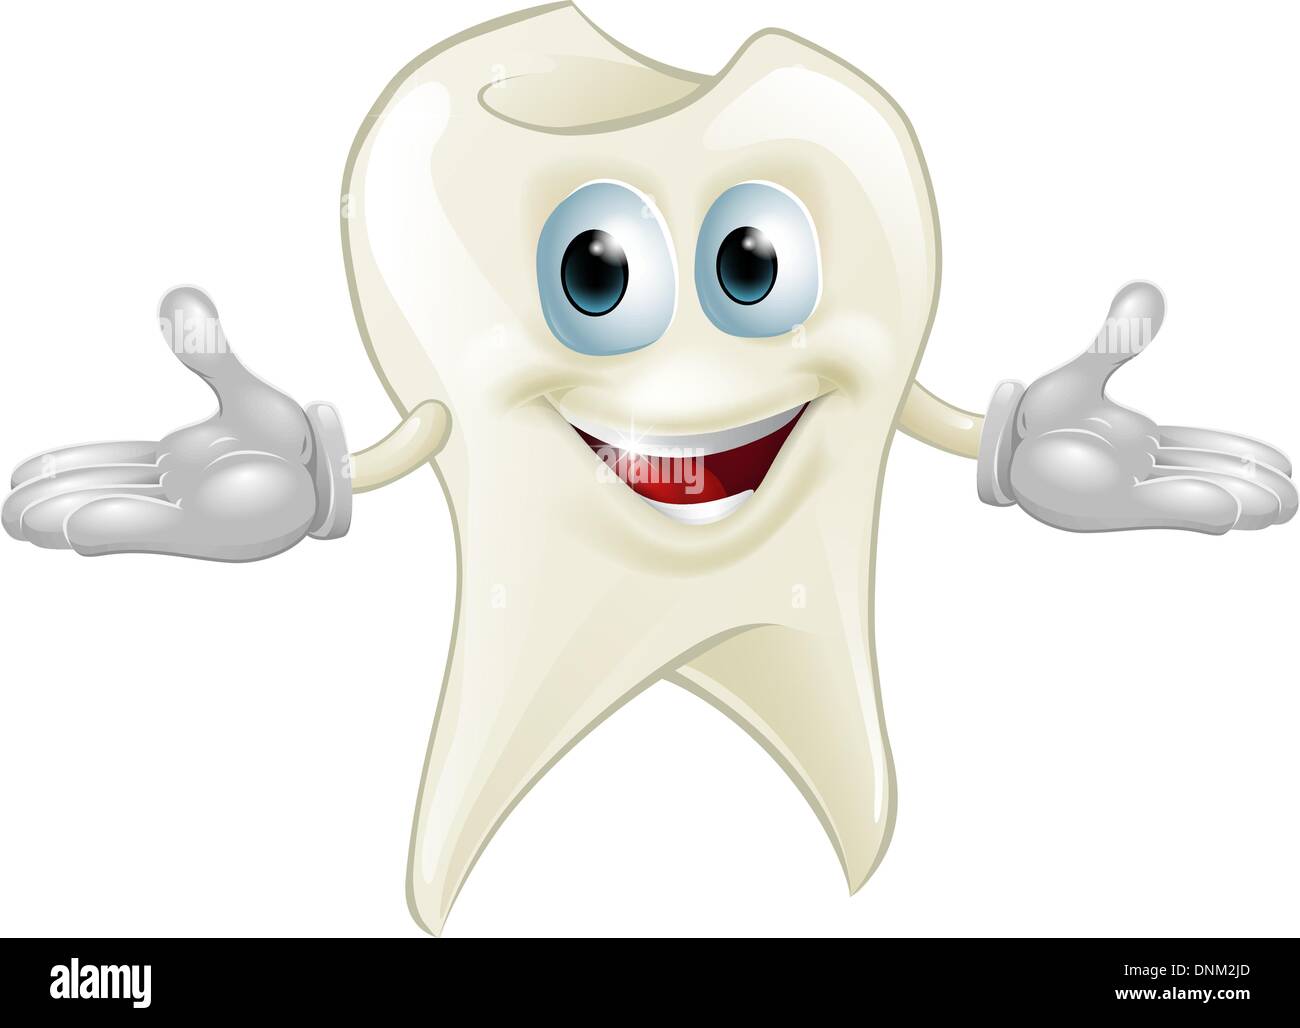 Illustration of a cute happy tooth mascot dental cartoon character Stock Vector